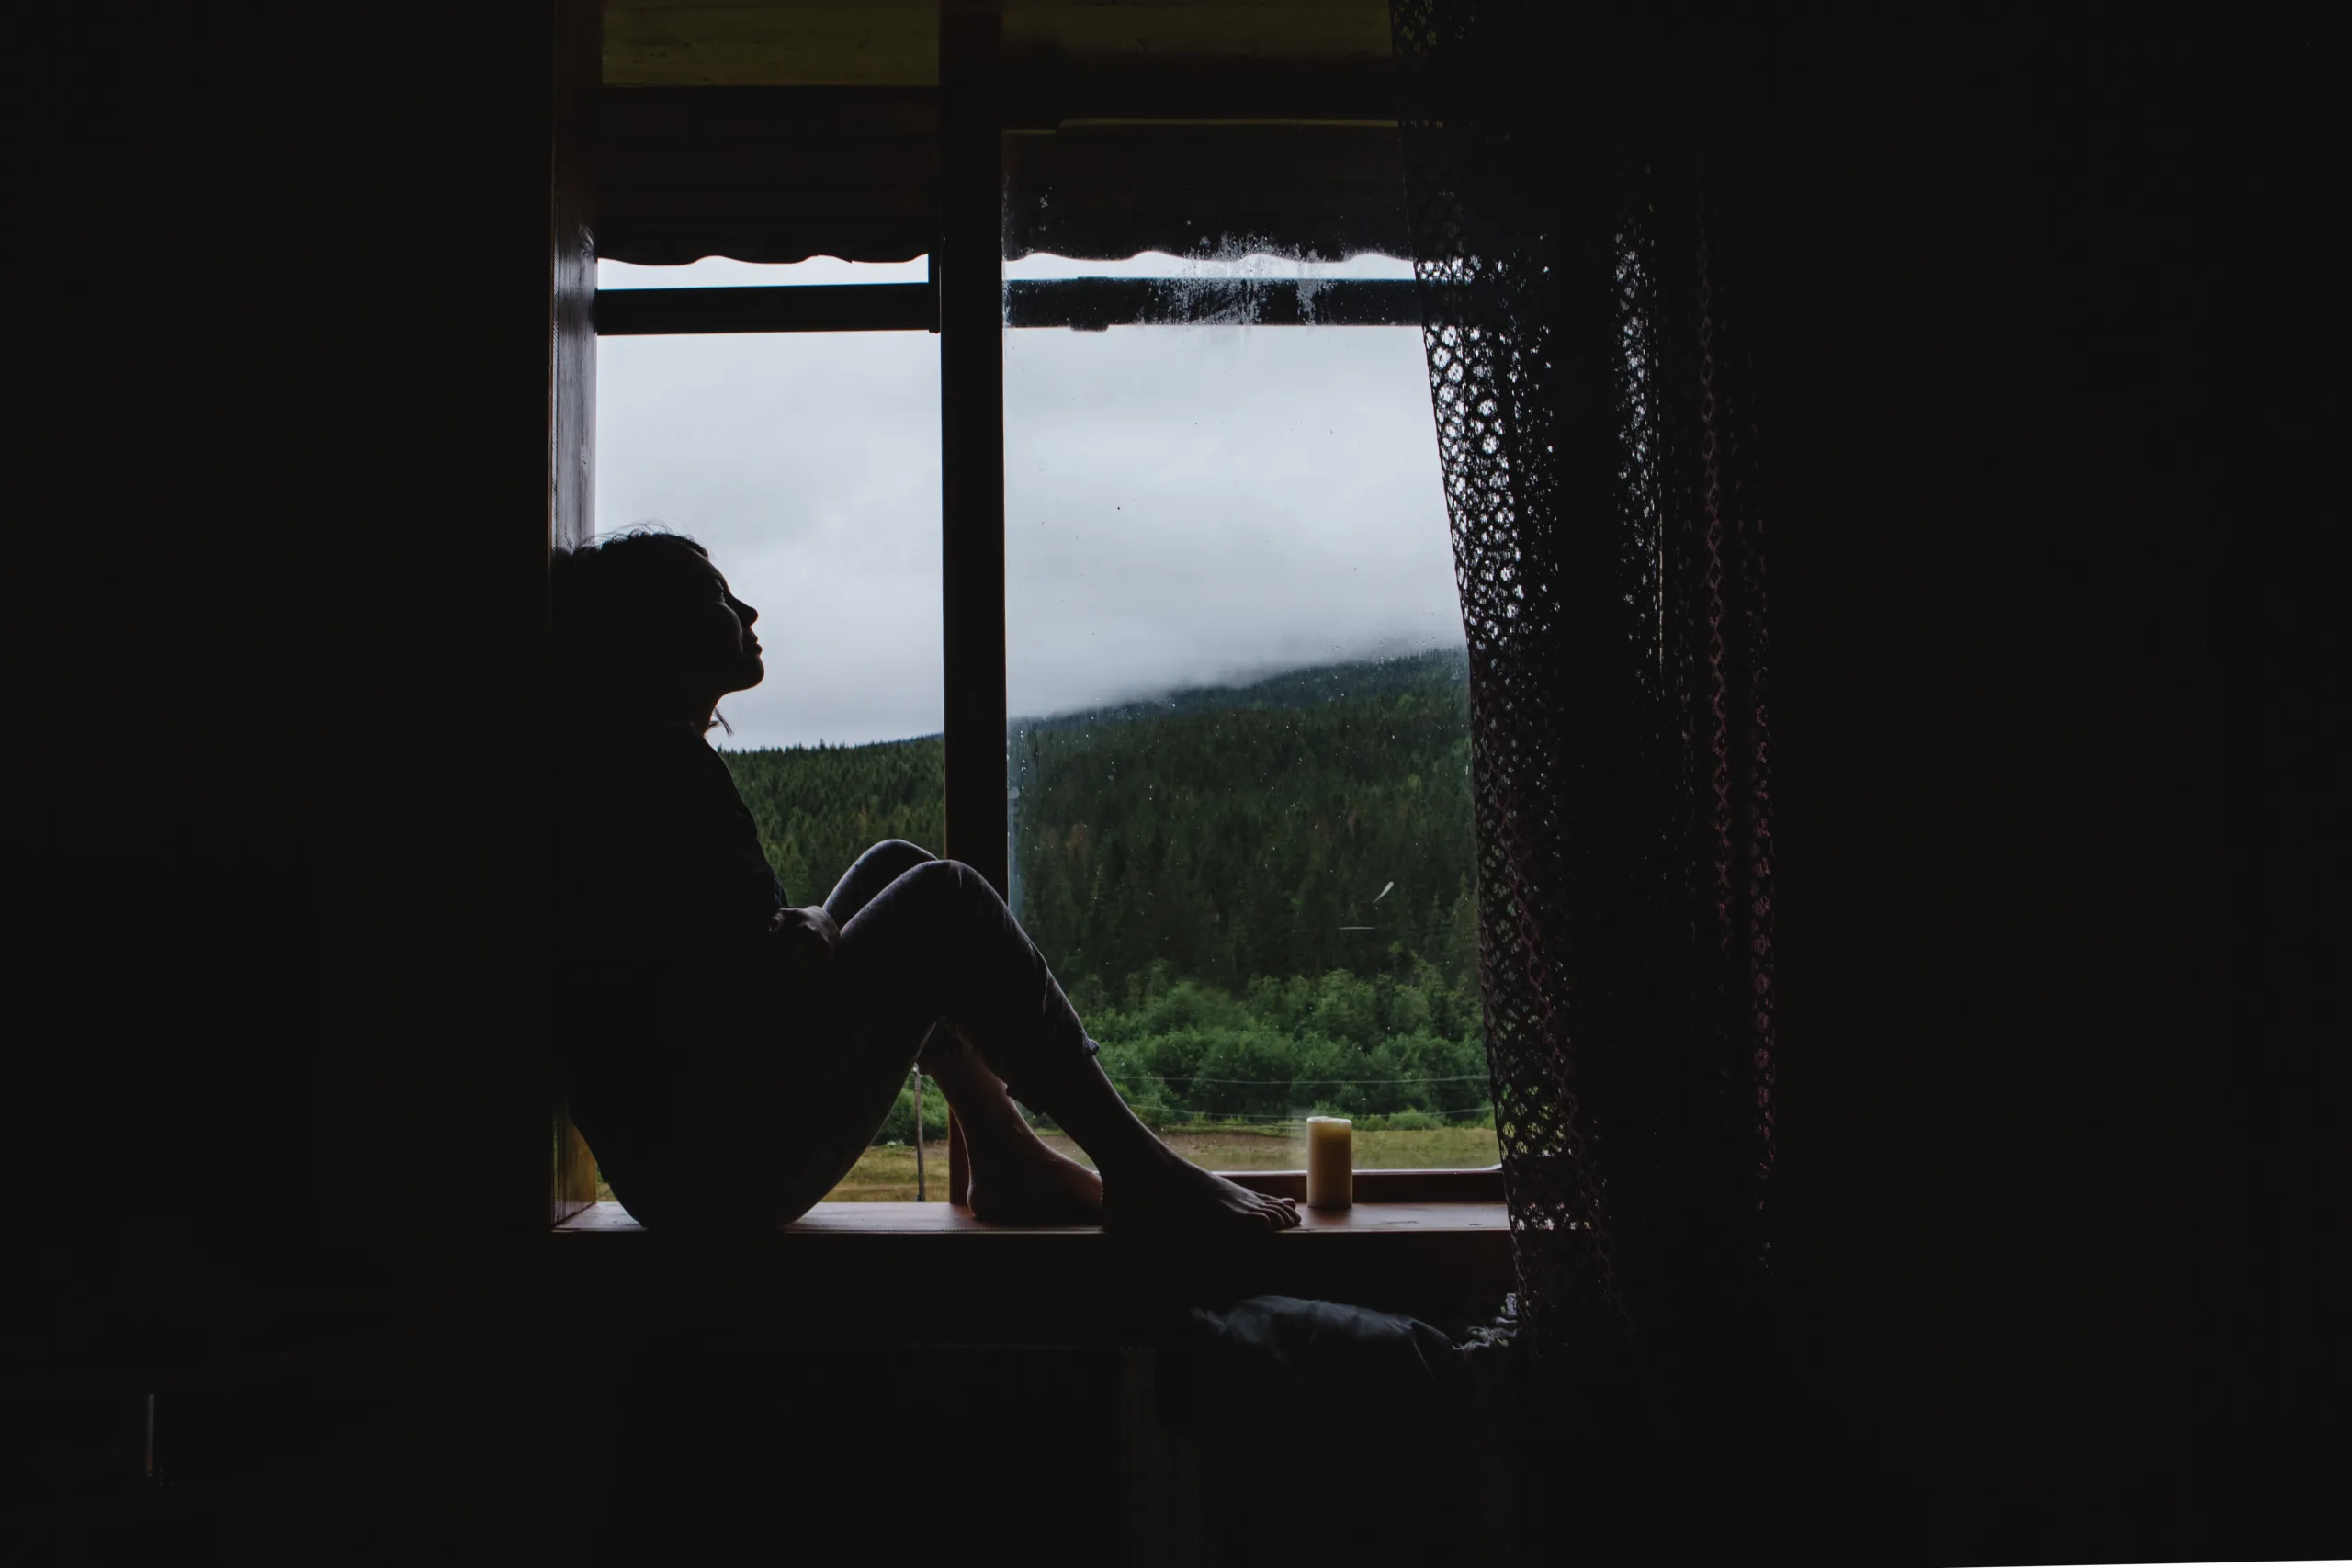 the girl is sitting on the windowsill. outside the window is a view of the mountains in the fog